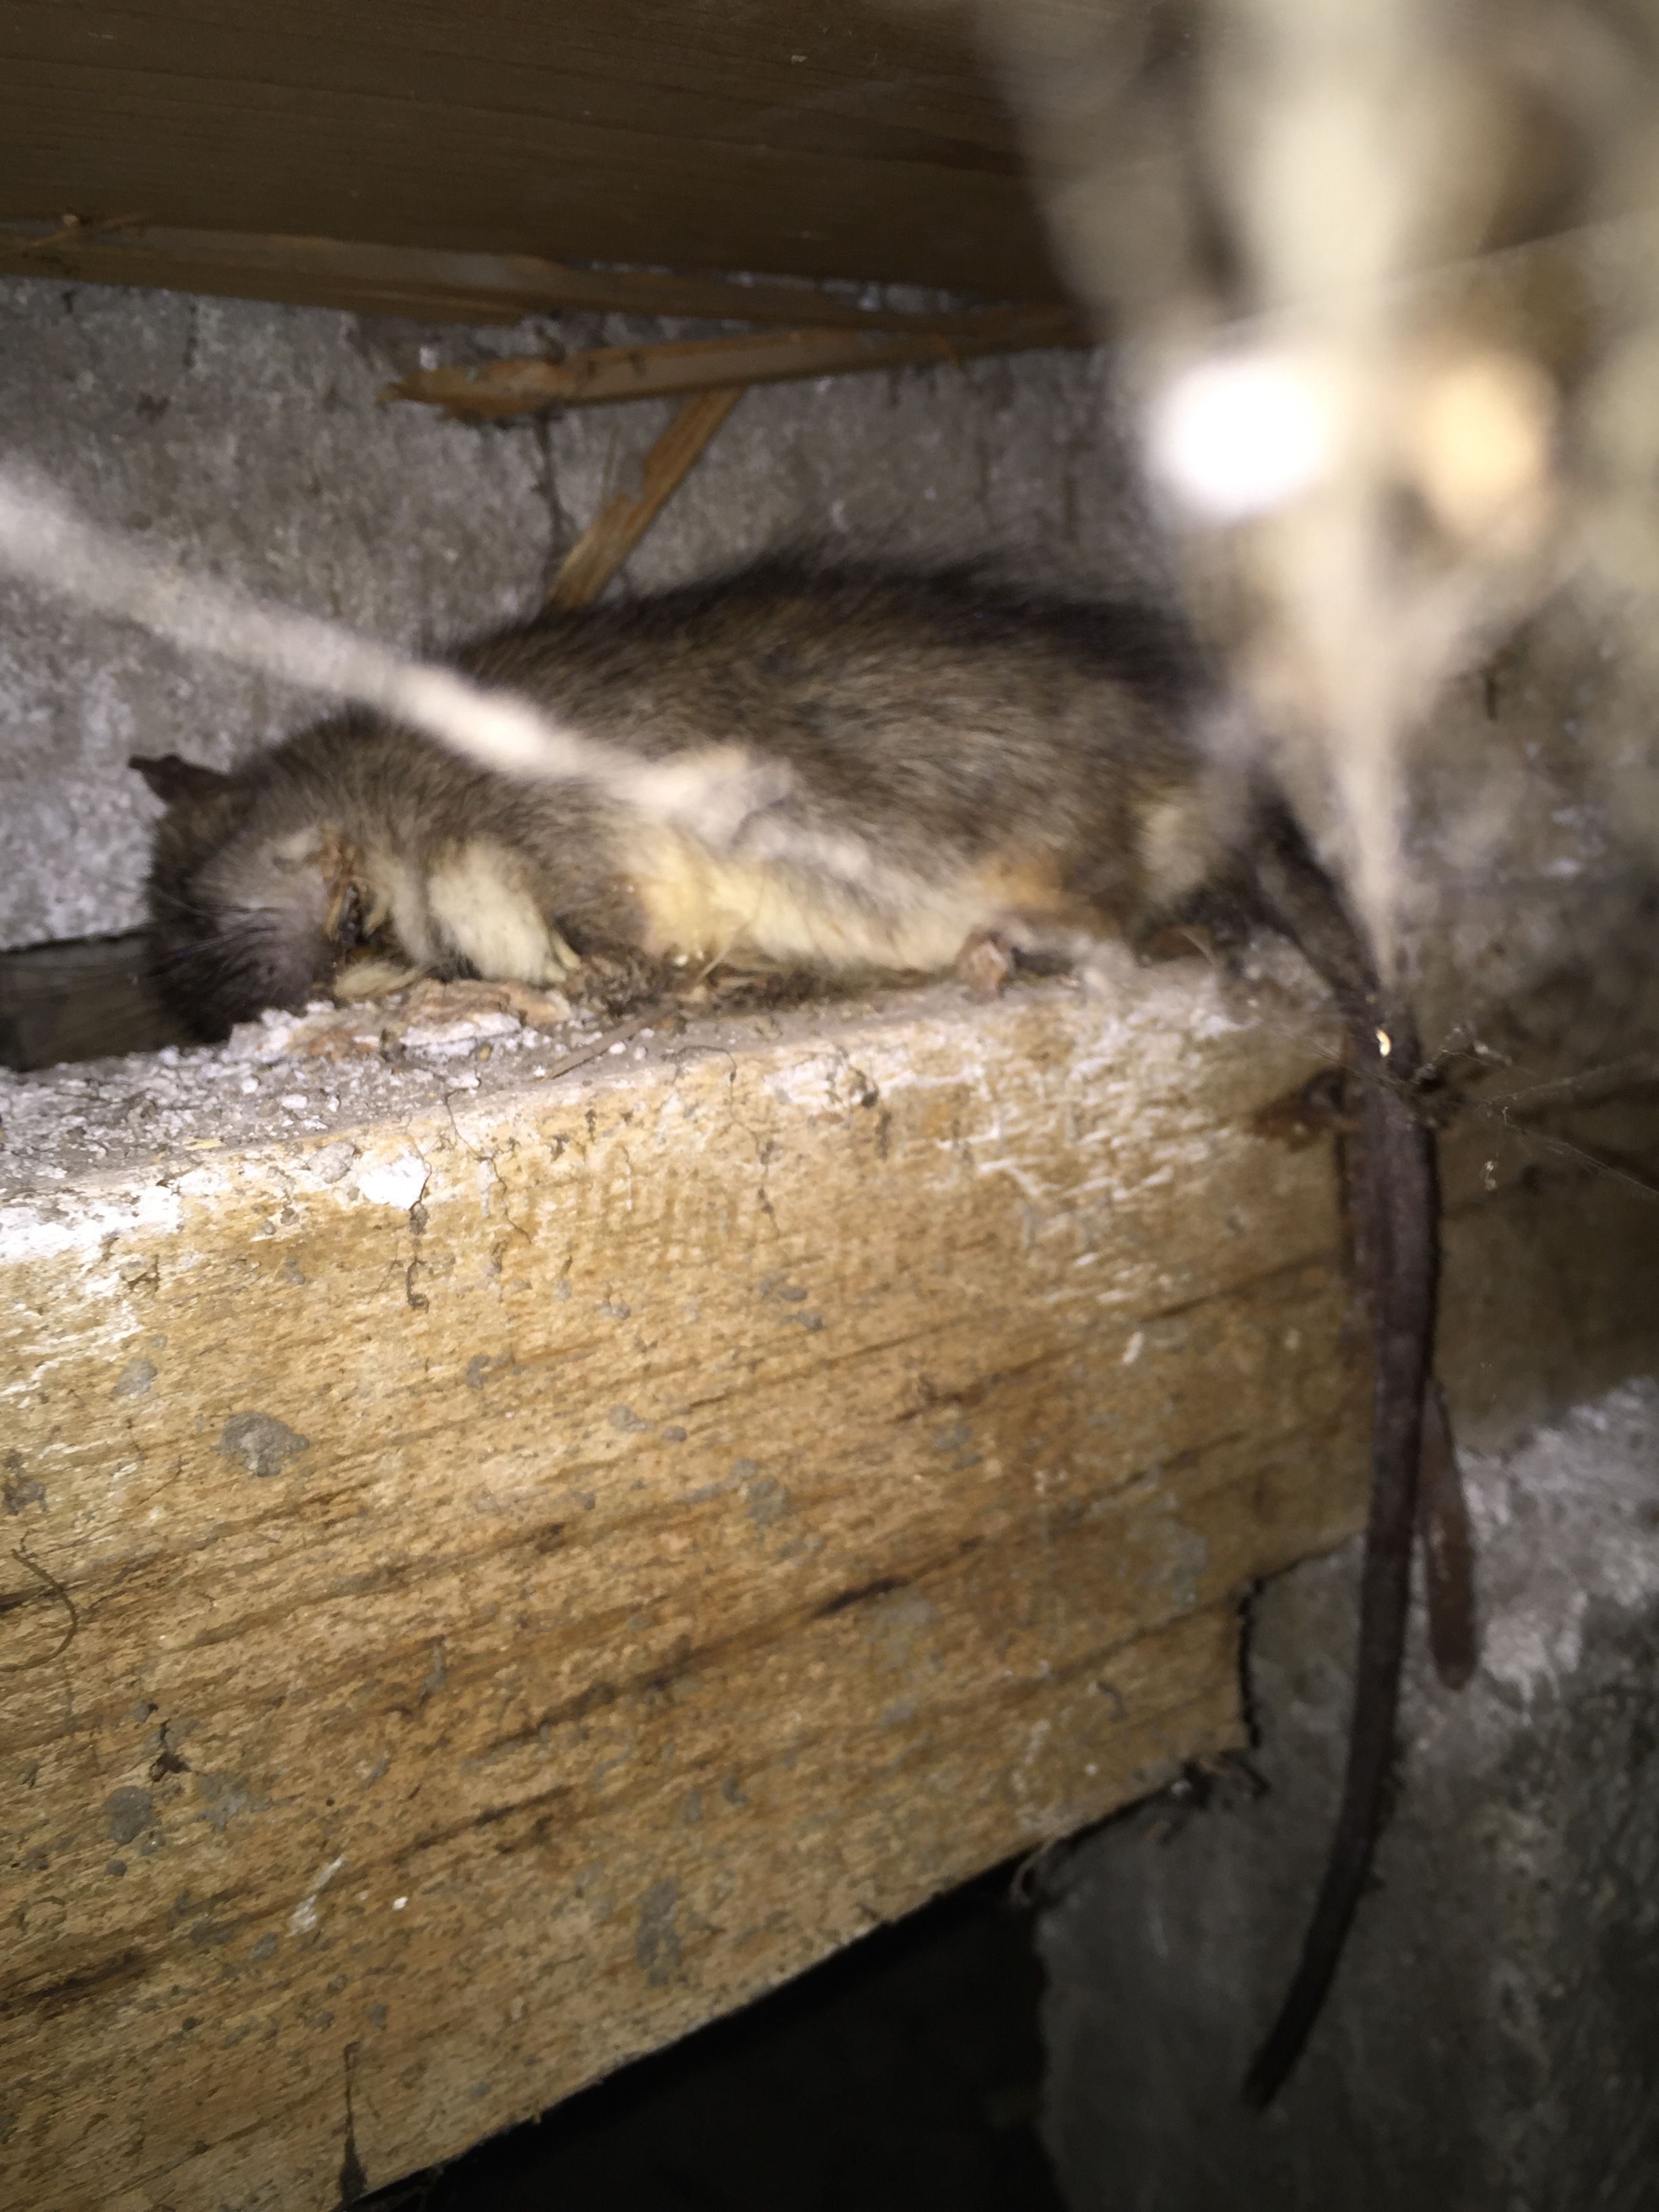 There's something living in my roof! - Pest Control Melbourne